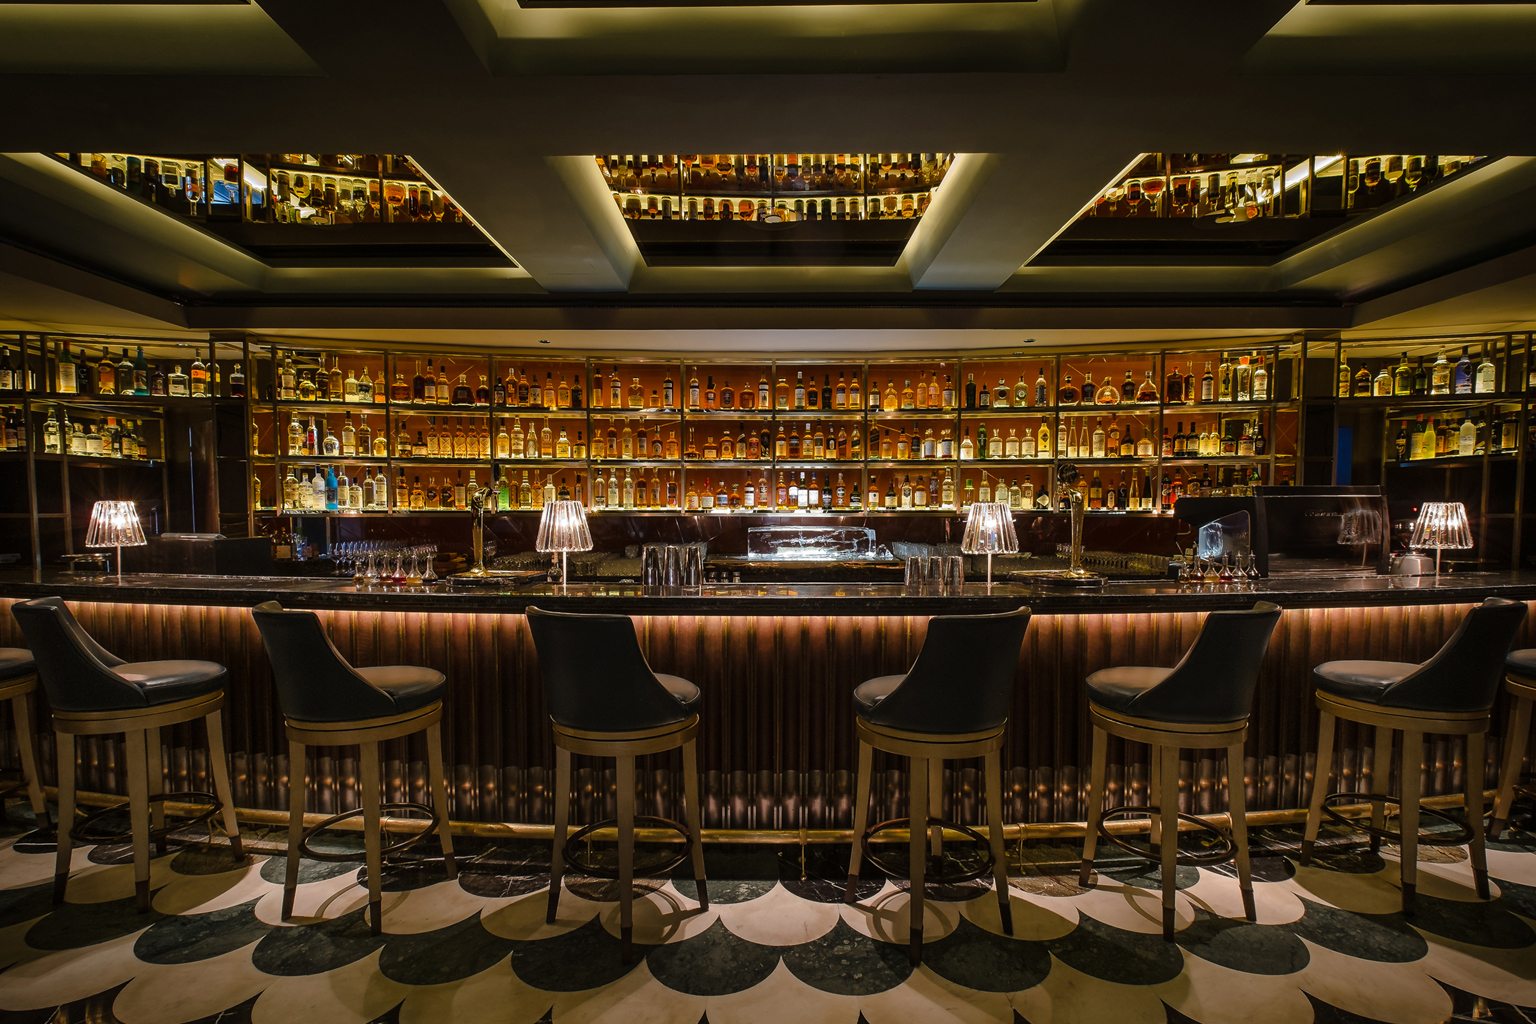 ARBARS08 -Caption: Manhattan Bar clinched the 11th spot at the World's 50 Best Bar Awards 2016. Source: Regent Singapore, A Four Seasons Hotel ##########bar##########SEE CAPTION